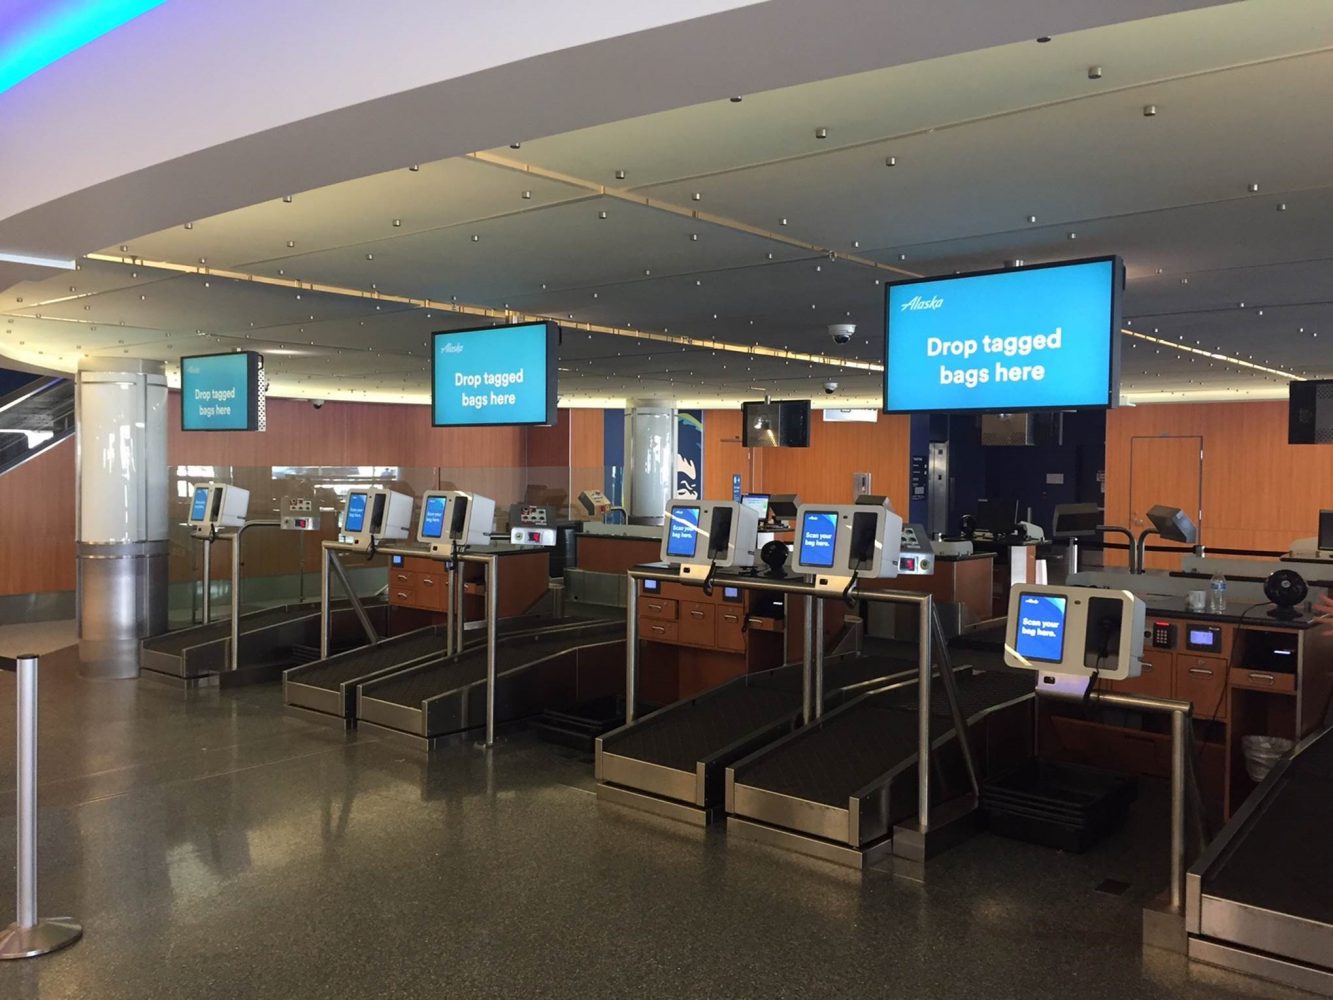 10/16/23 Bag check kiosks down at DCA. Staff says it's nationwide. :  r/americanairlines